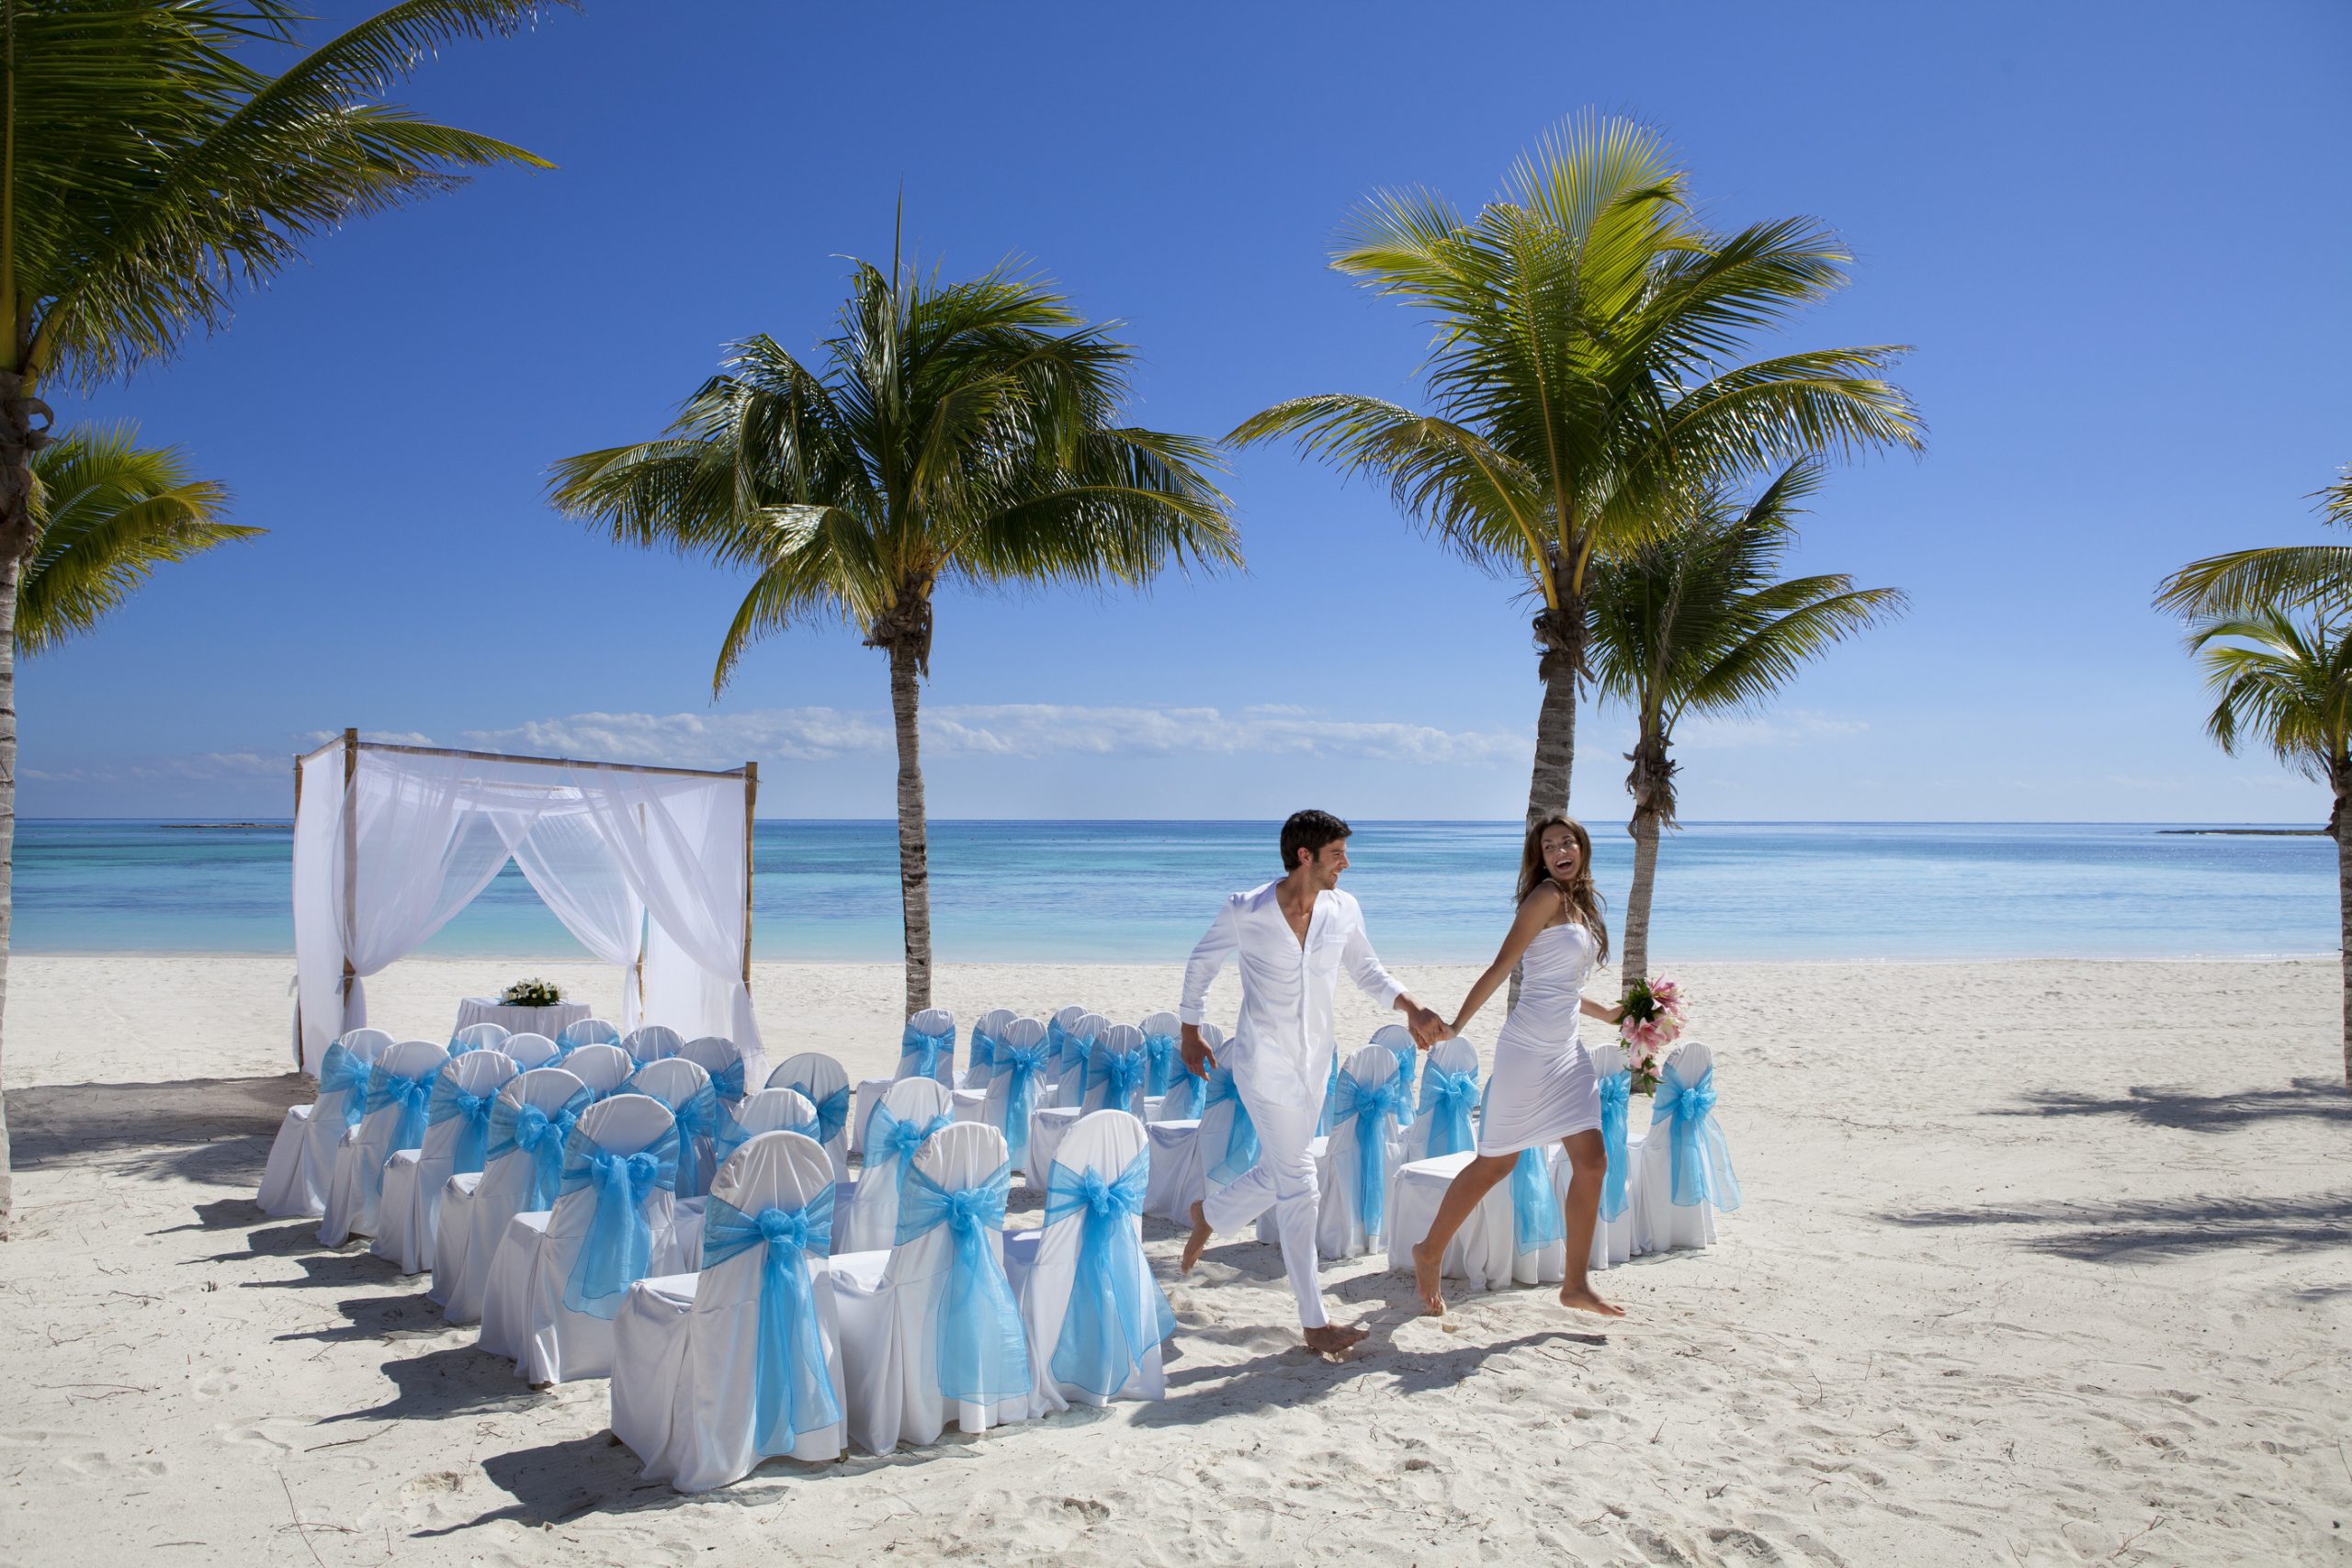 Barcelo Maya Palace destination wedding packages